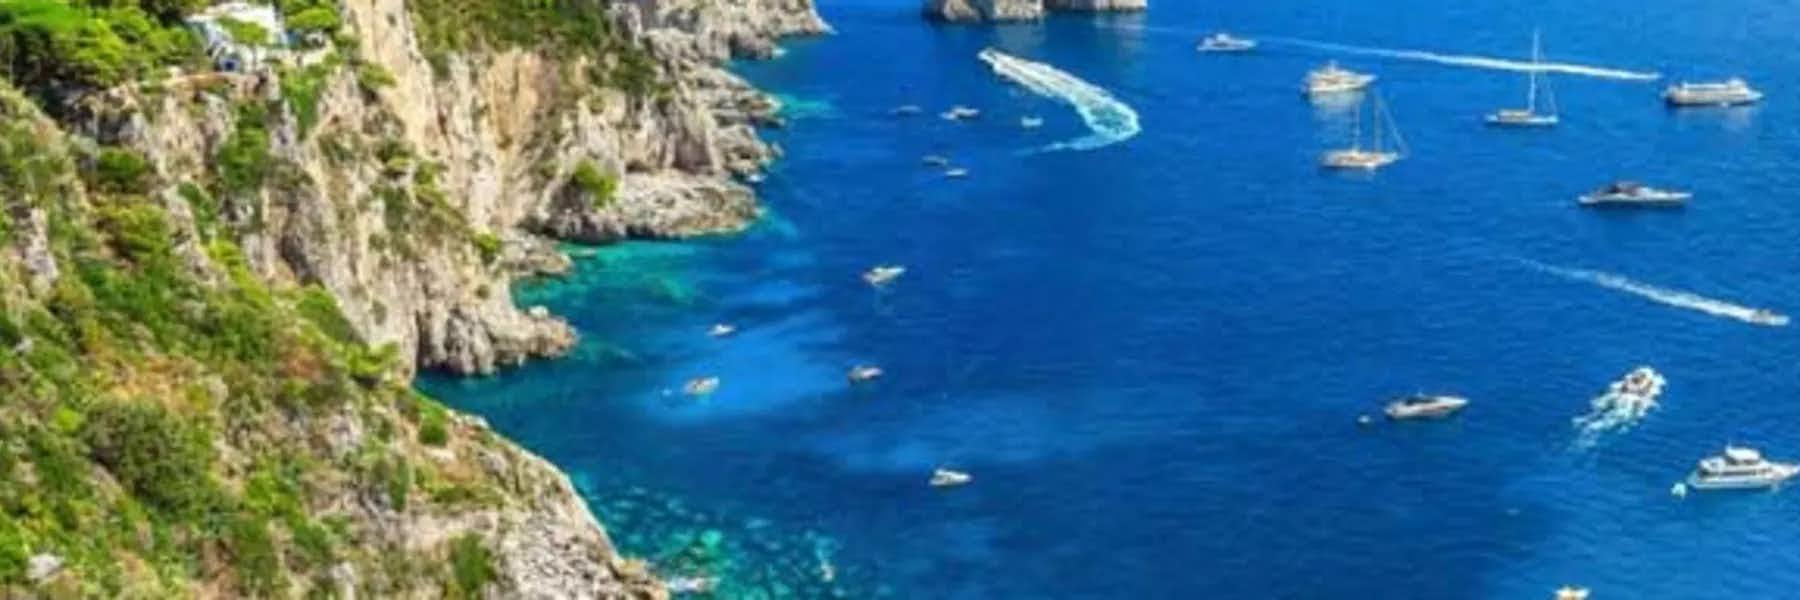 Guide to the Beautiful Island of Capri, Italy